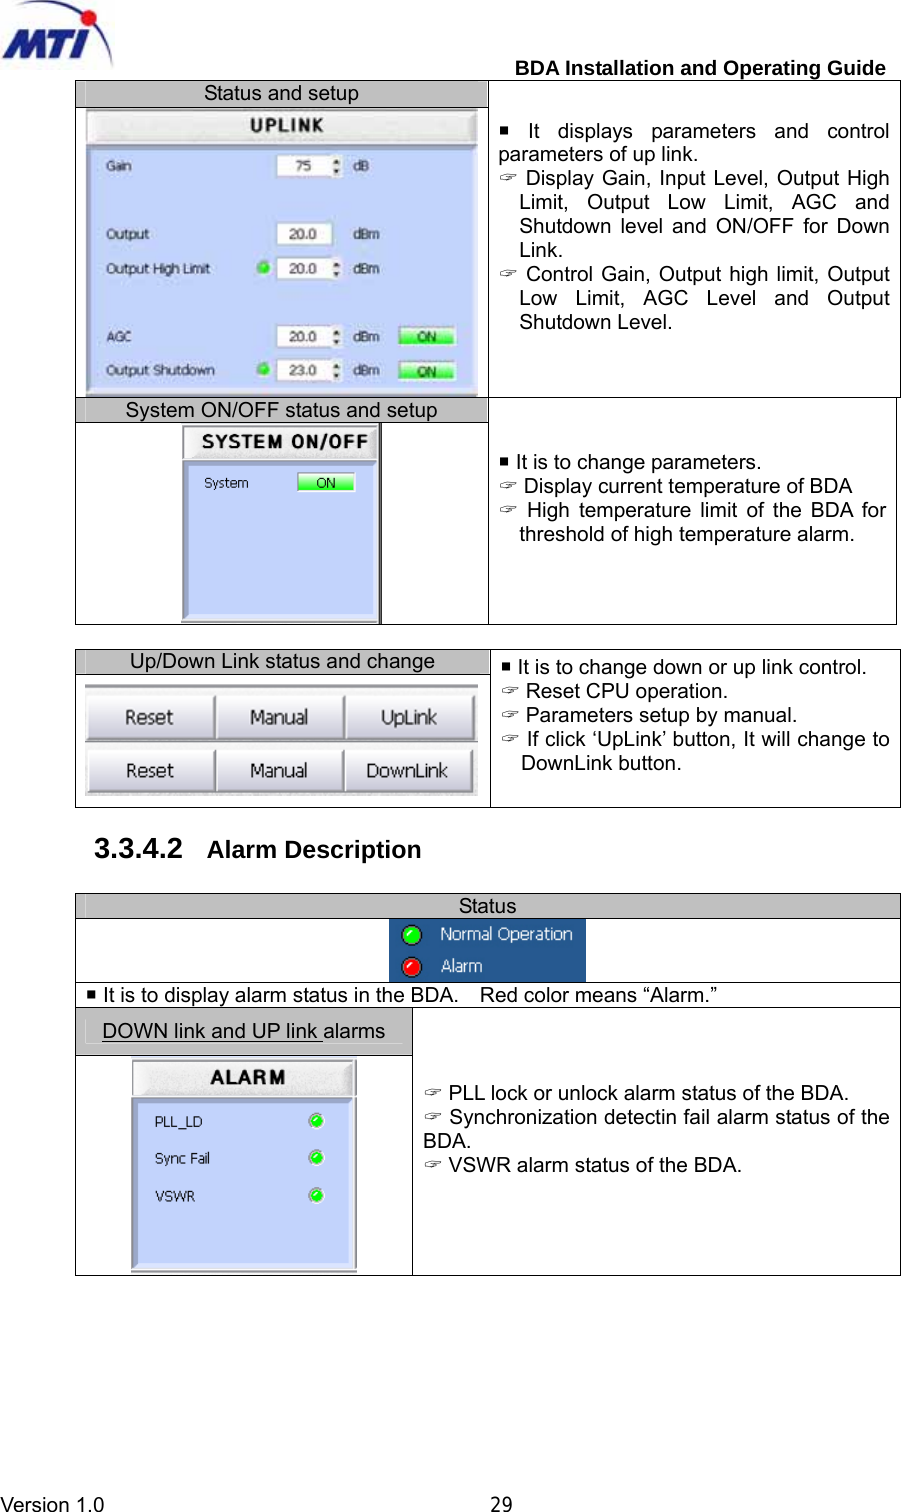         BDA Installation and Operating Guide Version 1.0                                       29 Status and setup  It displays parameters and control parameters of up link. &quot; Display Gain, Input Level, Output High Limit, Output Low Limit, AGC and Shutdown level and ON/OFF for Down Link. &quot; Control Gain, Output high limit, Output Low Limit, AGC Level and Output Shutdown Level.  System ON/OFF status and setup   It is to change parameters. &quot; Display current temperature of BDA &quot; High temperature limit of the BDA for threshold of high temperature alarm.   Up/Down Link status and change   It is to change down or up link control. &quot; Reset CPU operation. &quot; Parameters setup by manual. &quot; If click ‘UpLink’ button, It will change to DownLink button.   3.3.4.2  Alarm Description  Status   It is to display alarm status in the BDA.    Red color means “Alarm.” DOWN link and UP link alarms  &quot; PLL lock or unlock alarm status of the BDA. &quot; Synchronization detectin fail alarm status of the BDA.  &quot; VSWR alarm status of the BDA.        